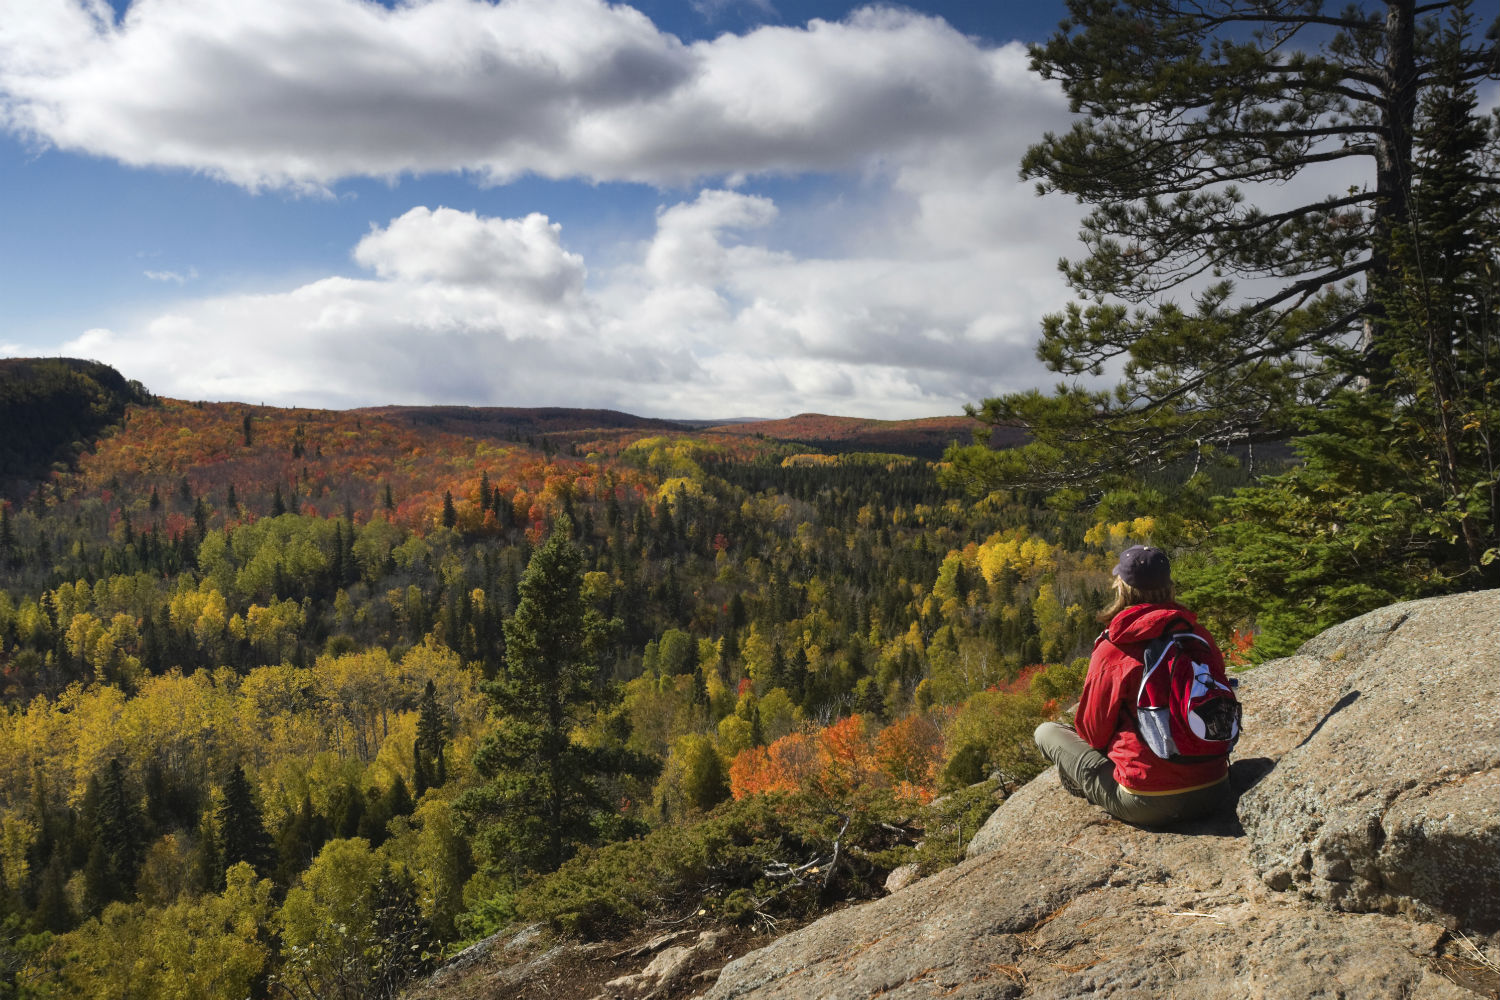 Taking in a scenic autumn view along the Superior Hiking Trail northeast of Duluth. Jim Kruger / E+ / Getty Images